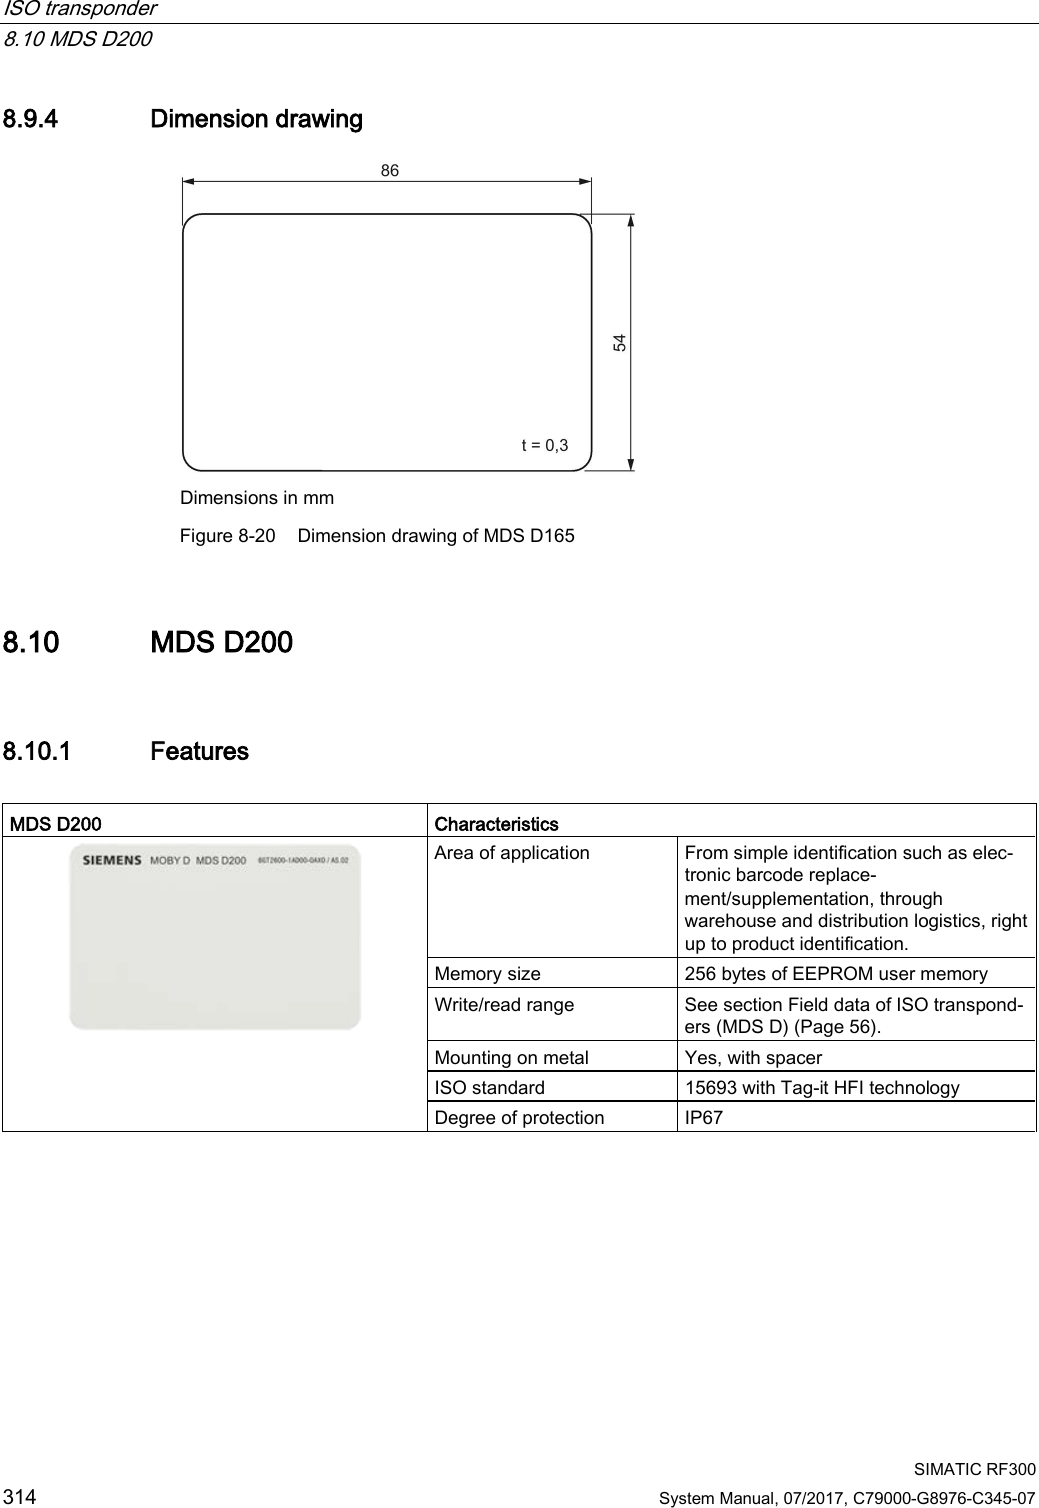 ISO transponder   8.10 MDS D200  SIMATIC RF300 314 System Manual, 07/2017, C79000-G8976-C345-07 8.9.4 Dimension drawing  Dimensions in mm  Figure 8-20 Dimension drawing of MDS D165 8.10 MDS D200 8.10.1 Features  MDS D200 Characteristics  Area of application From simple identification such as elec-tronic barcode replace-ment/supplementation, through warehouse and distribution logistics, right up to product identification. Memory size 256 bytes of EEPROM user memory Write/read range See section Field data of ISO transpond-ers (MDS D) (Page 56). Mounting on metal Yes, with spacer ISO standard 15693 with Tag-it HFI technology Degree of protection IP67 